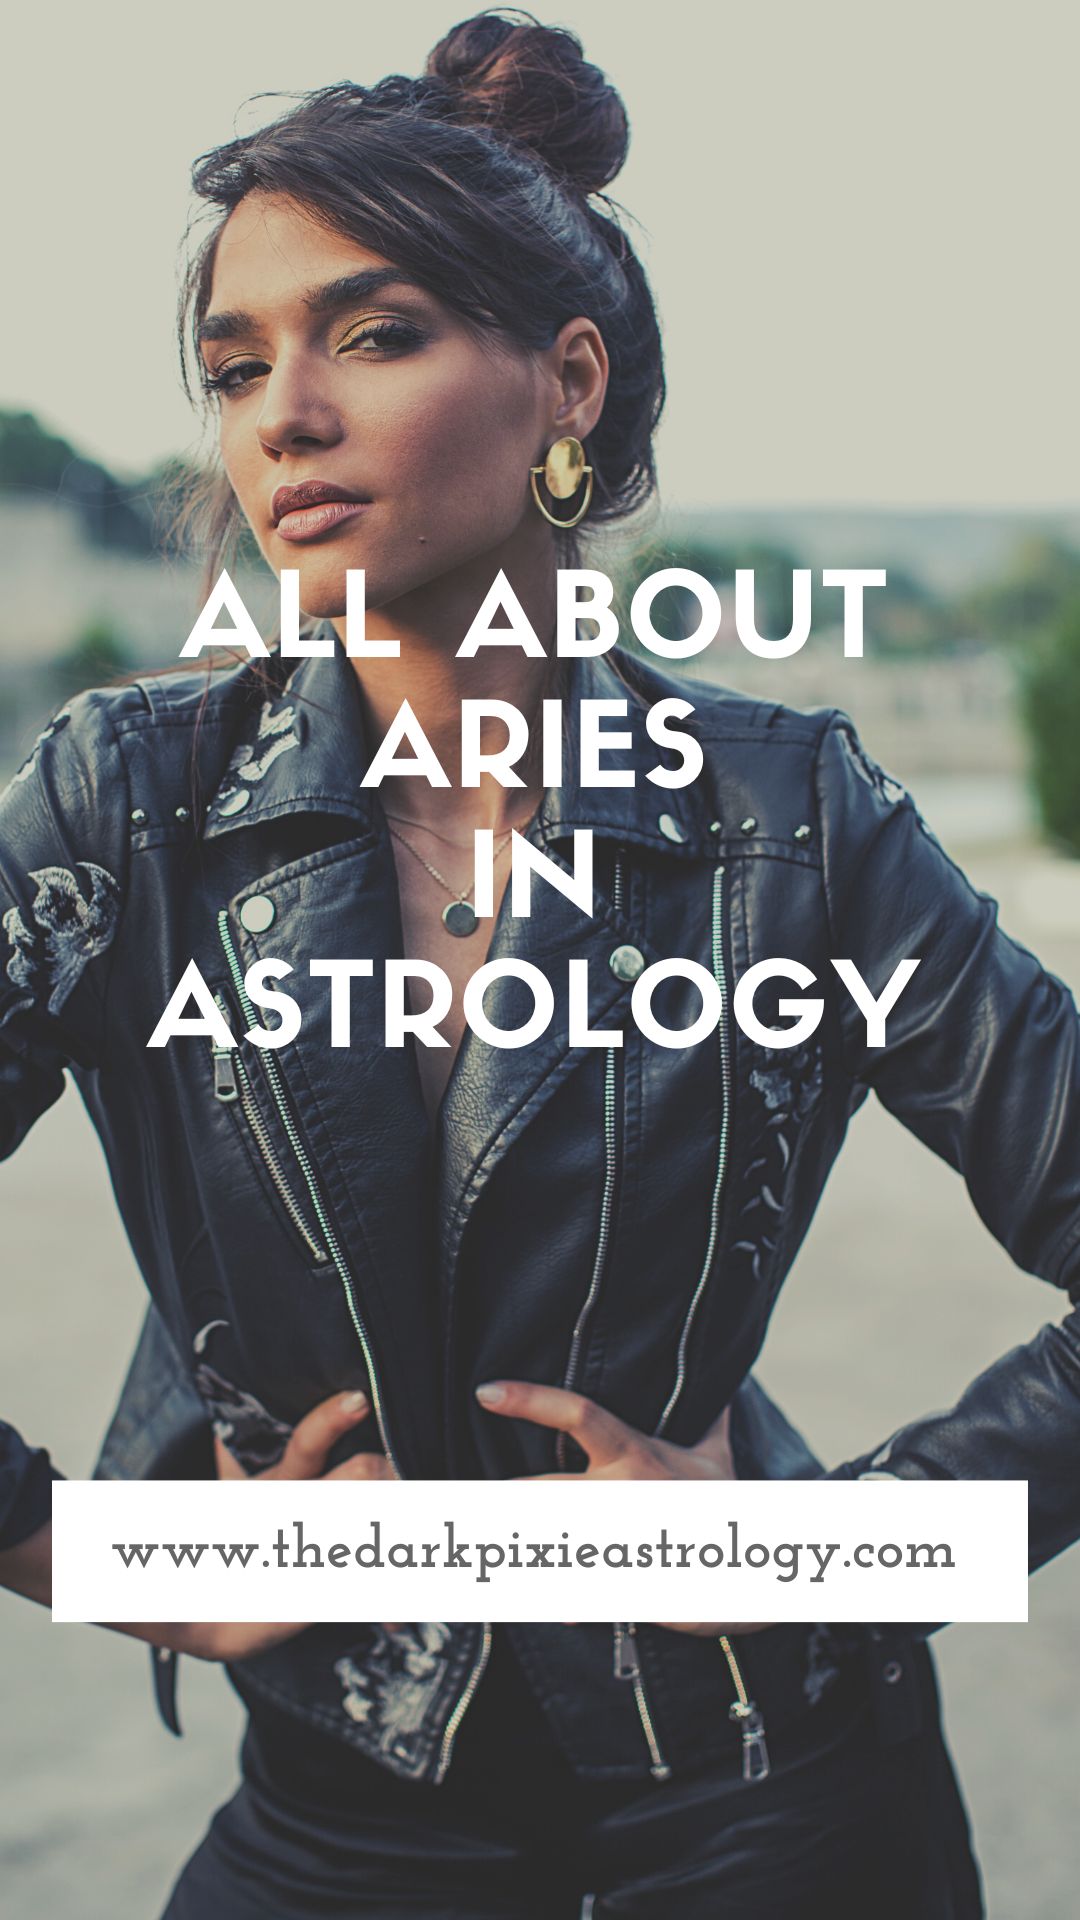 All About Aries in Astrology - The Dark Pixie Astrology